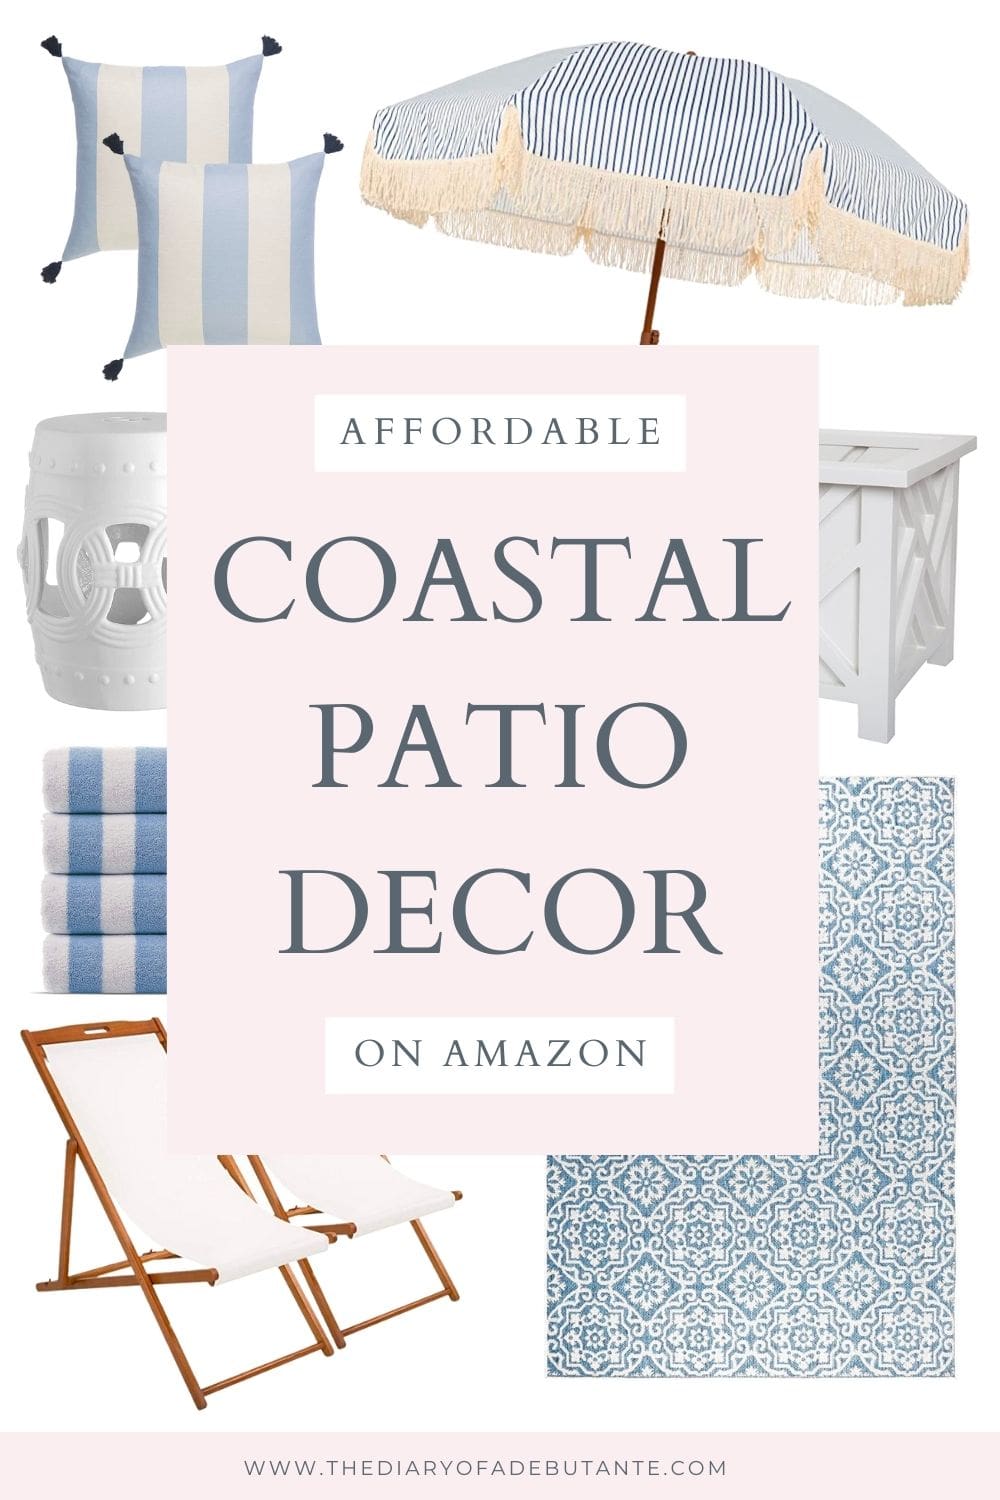 Blogger Stephanie Ziajka rounds up her favorite coastal patio decor from Amazon on Diary of a Debutante